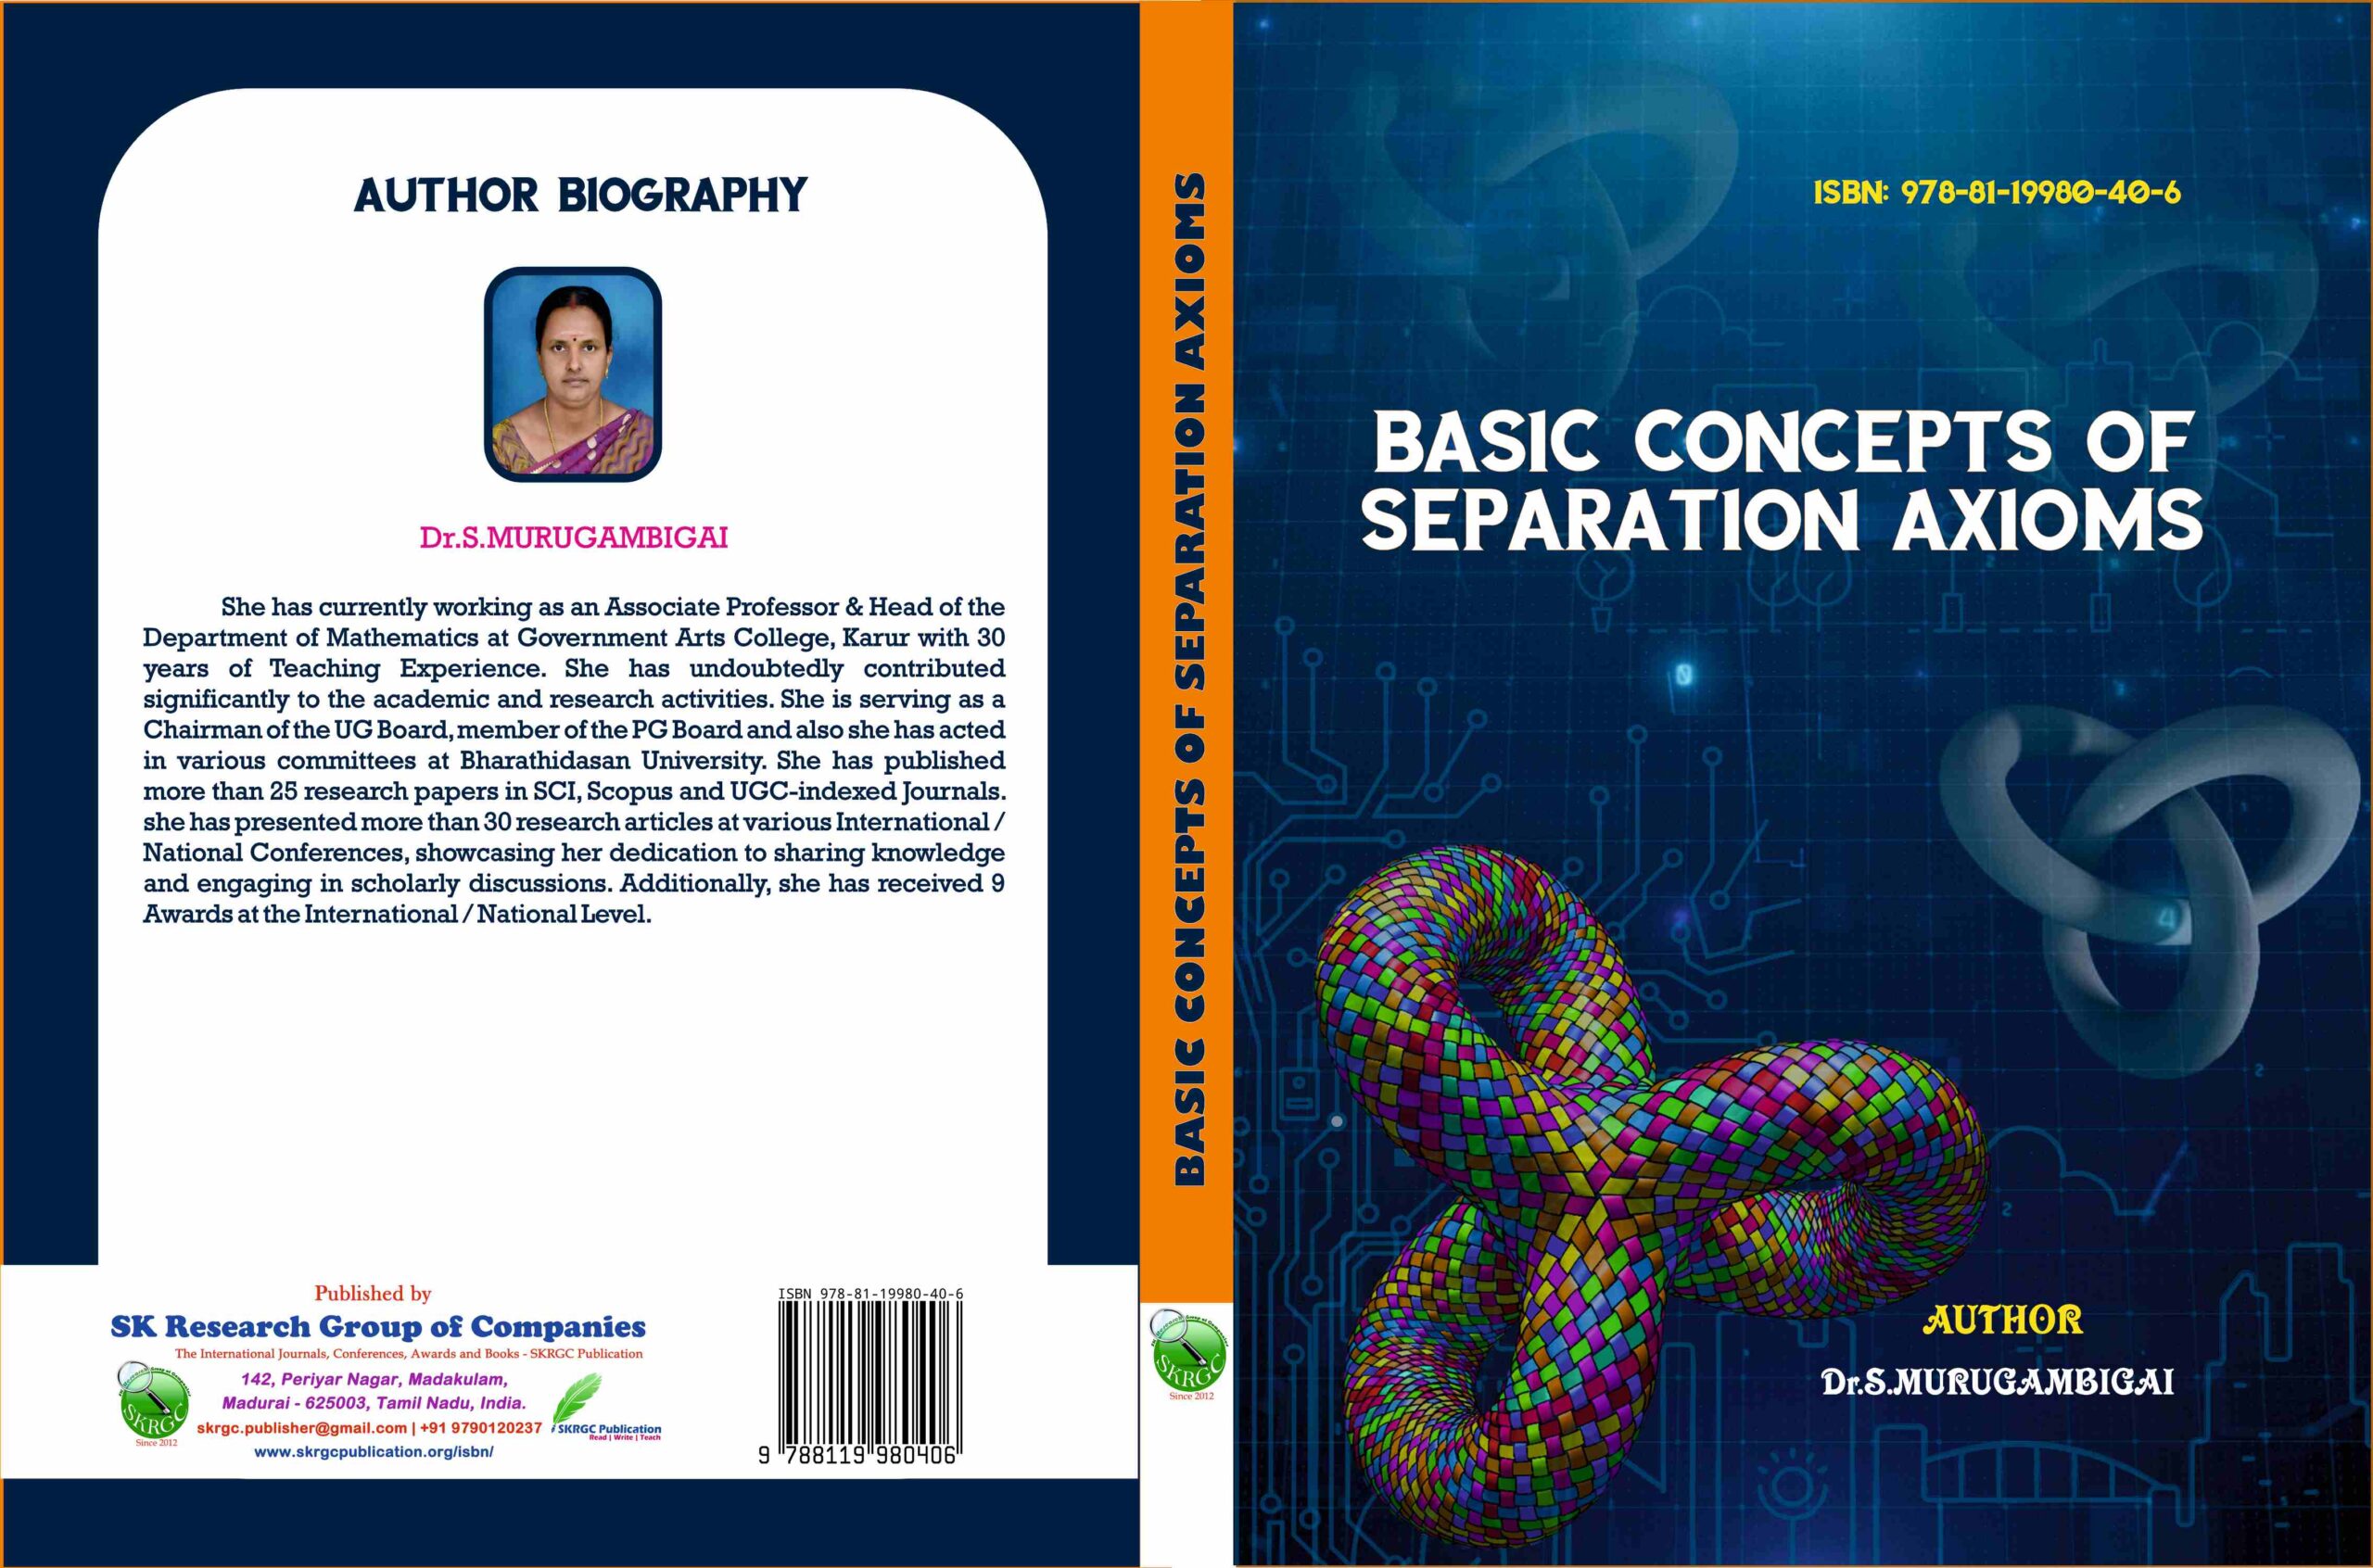 BASIC CONCEPTS OF SEPARATION AXIOMS